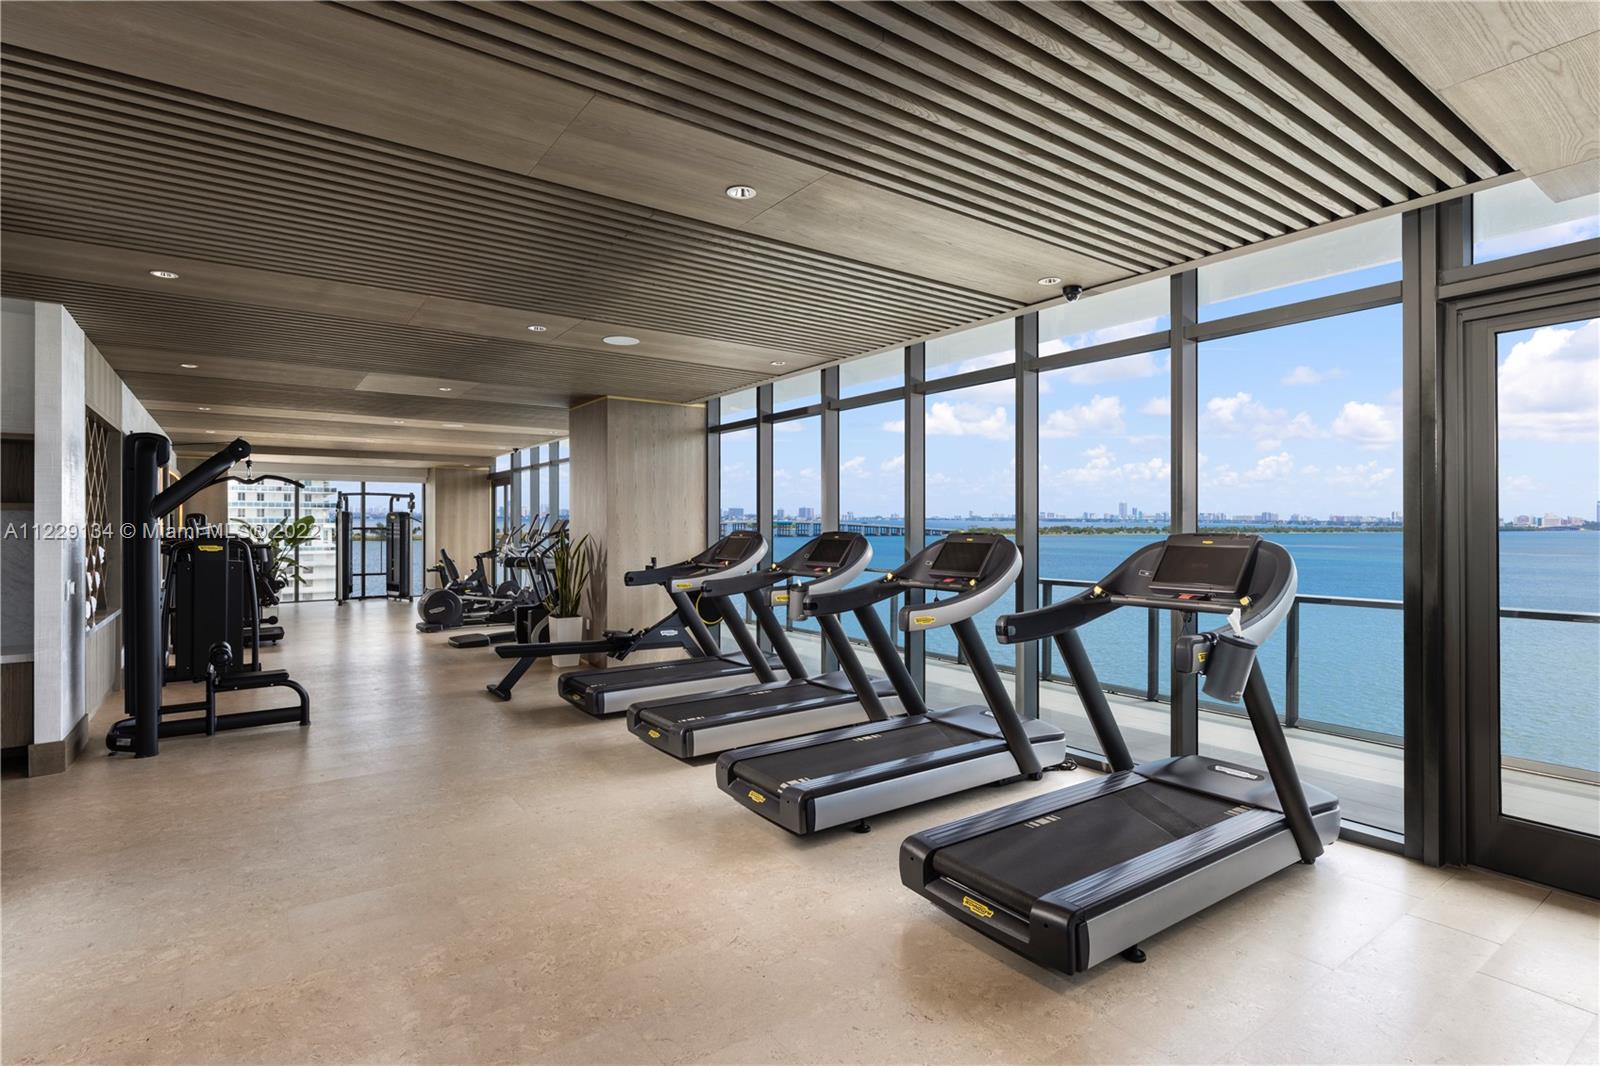 Floor 7th Gym/Bay View